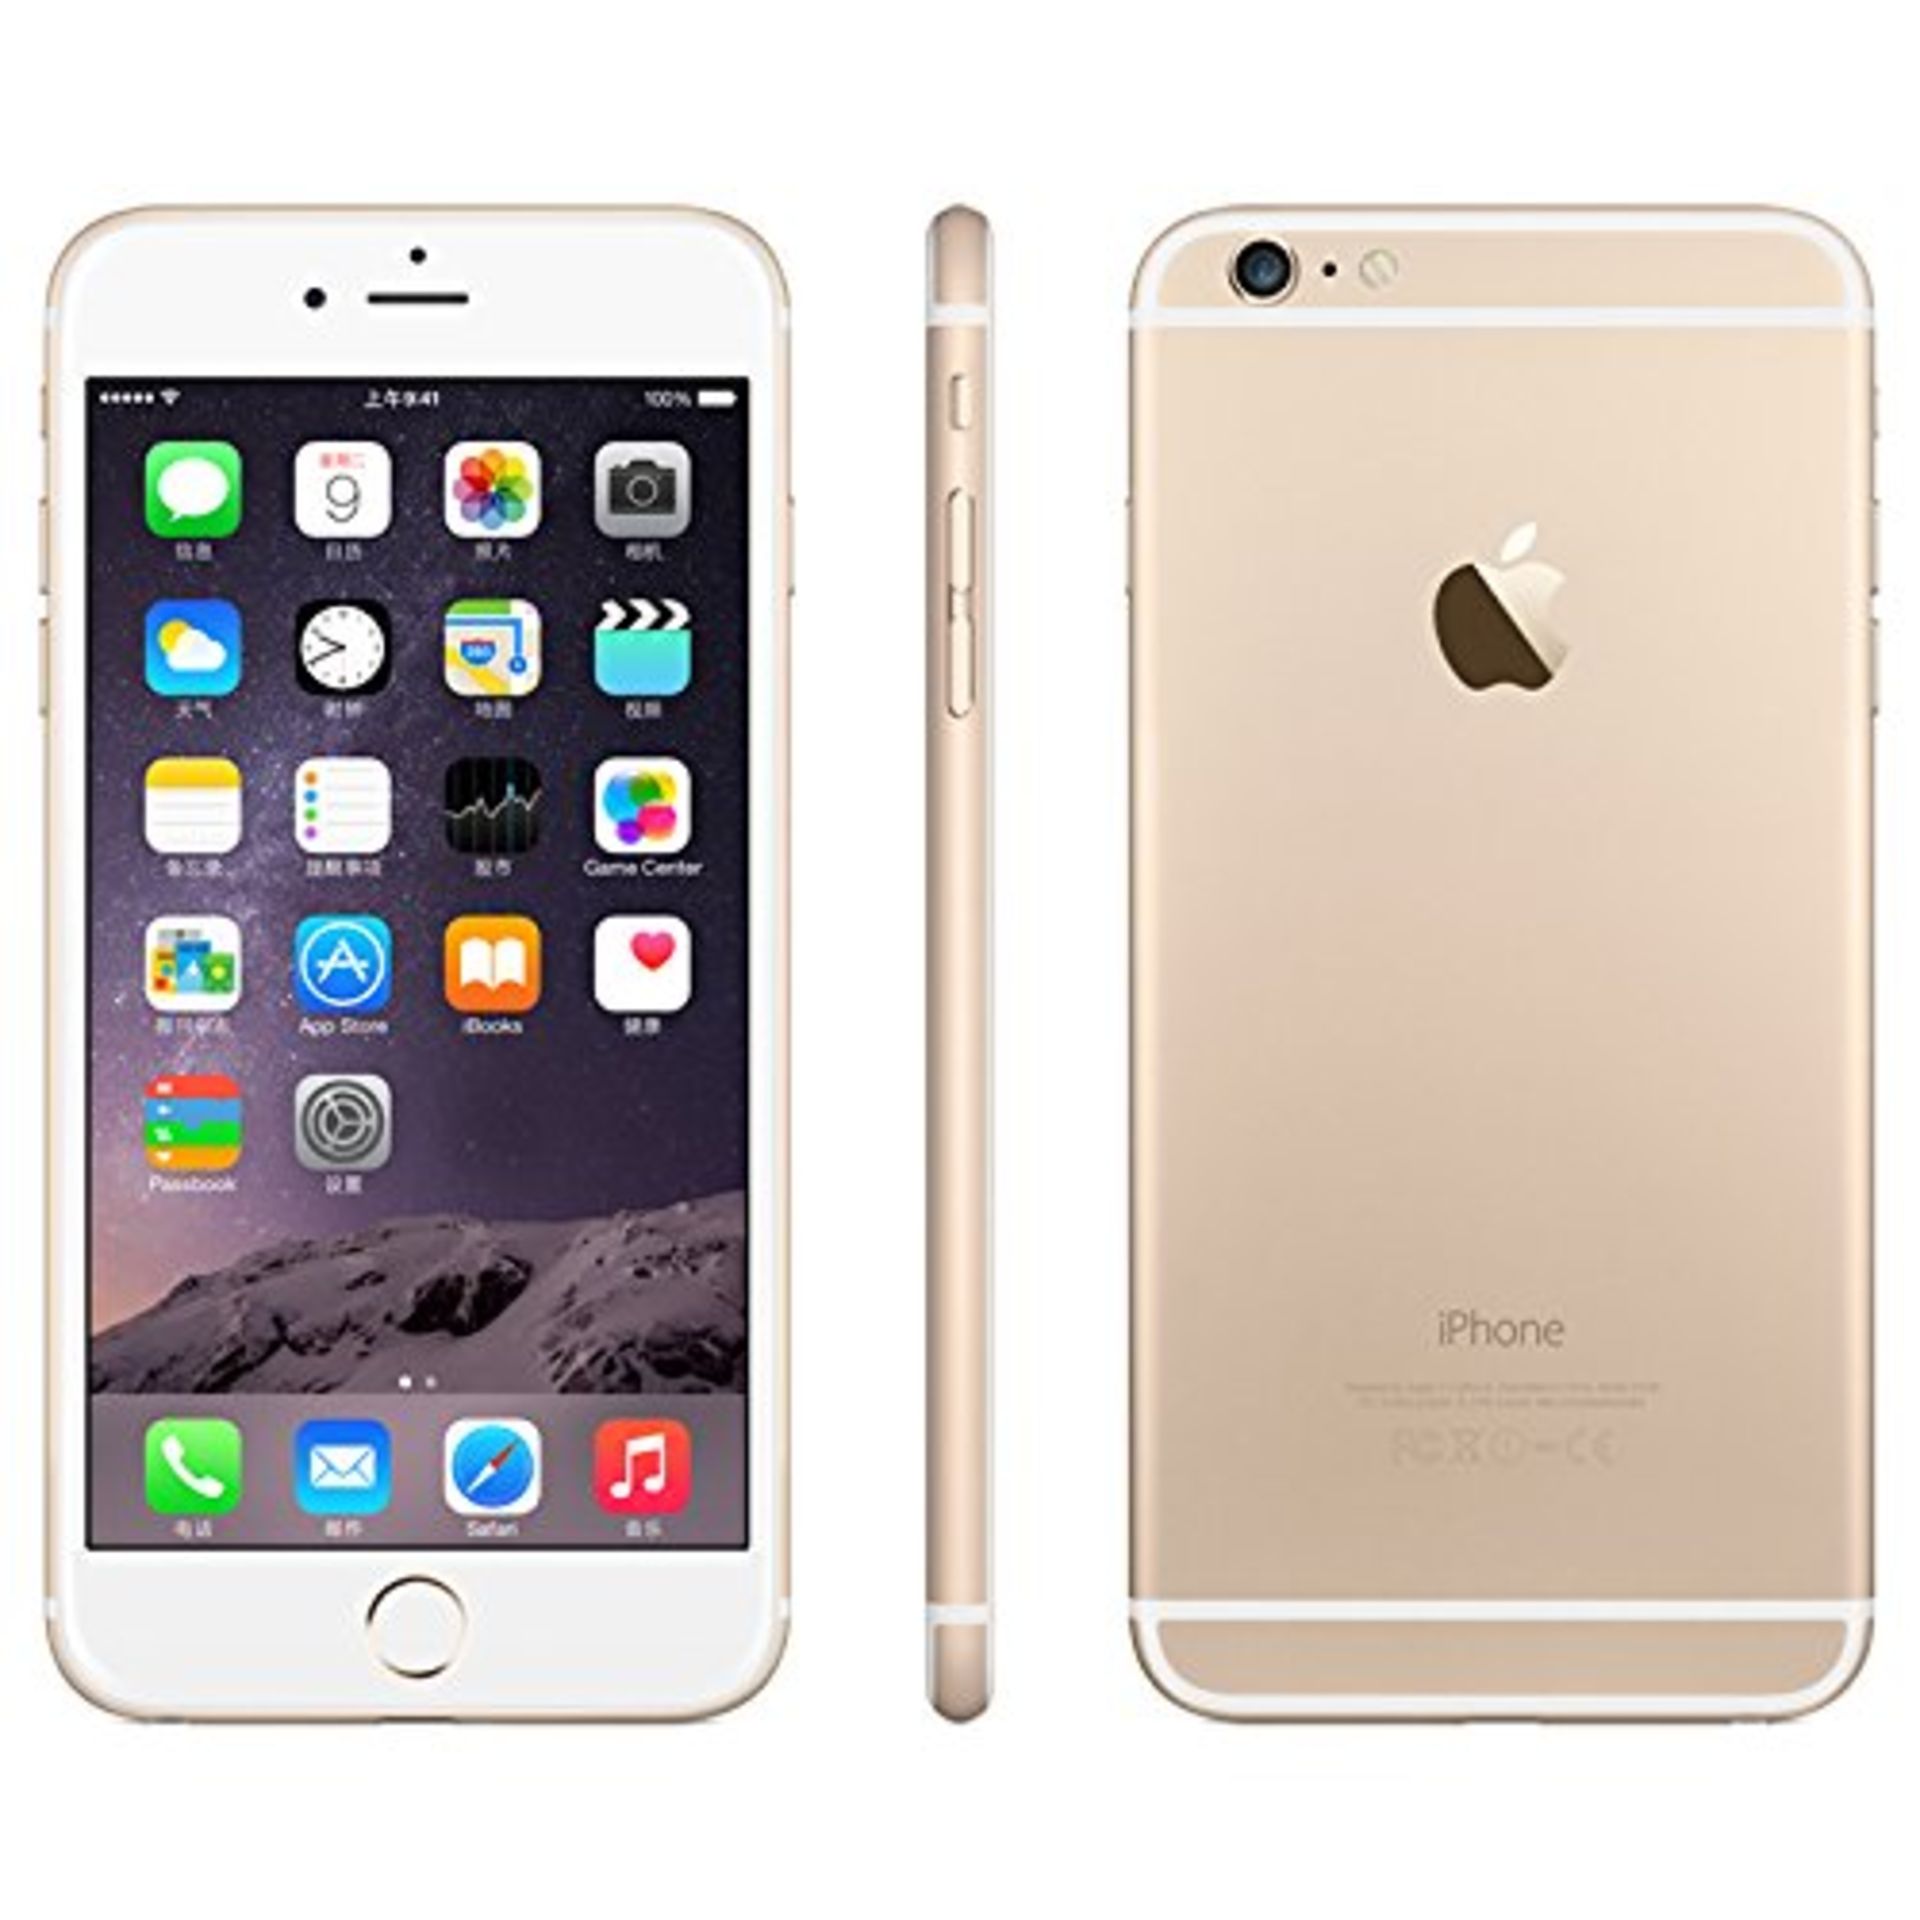 Grade A Apple iphone 6s plus 64GB Colours May Vary Touch ID Item available approx 12 working days